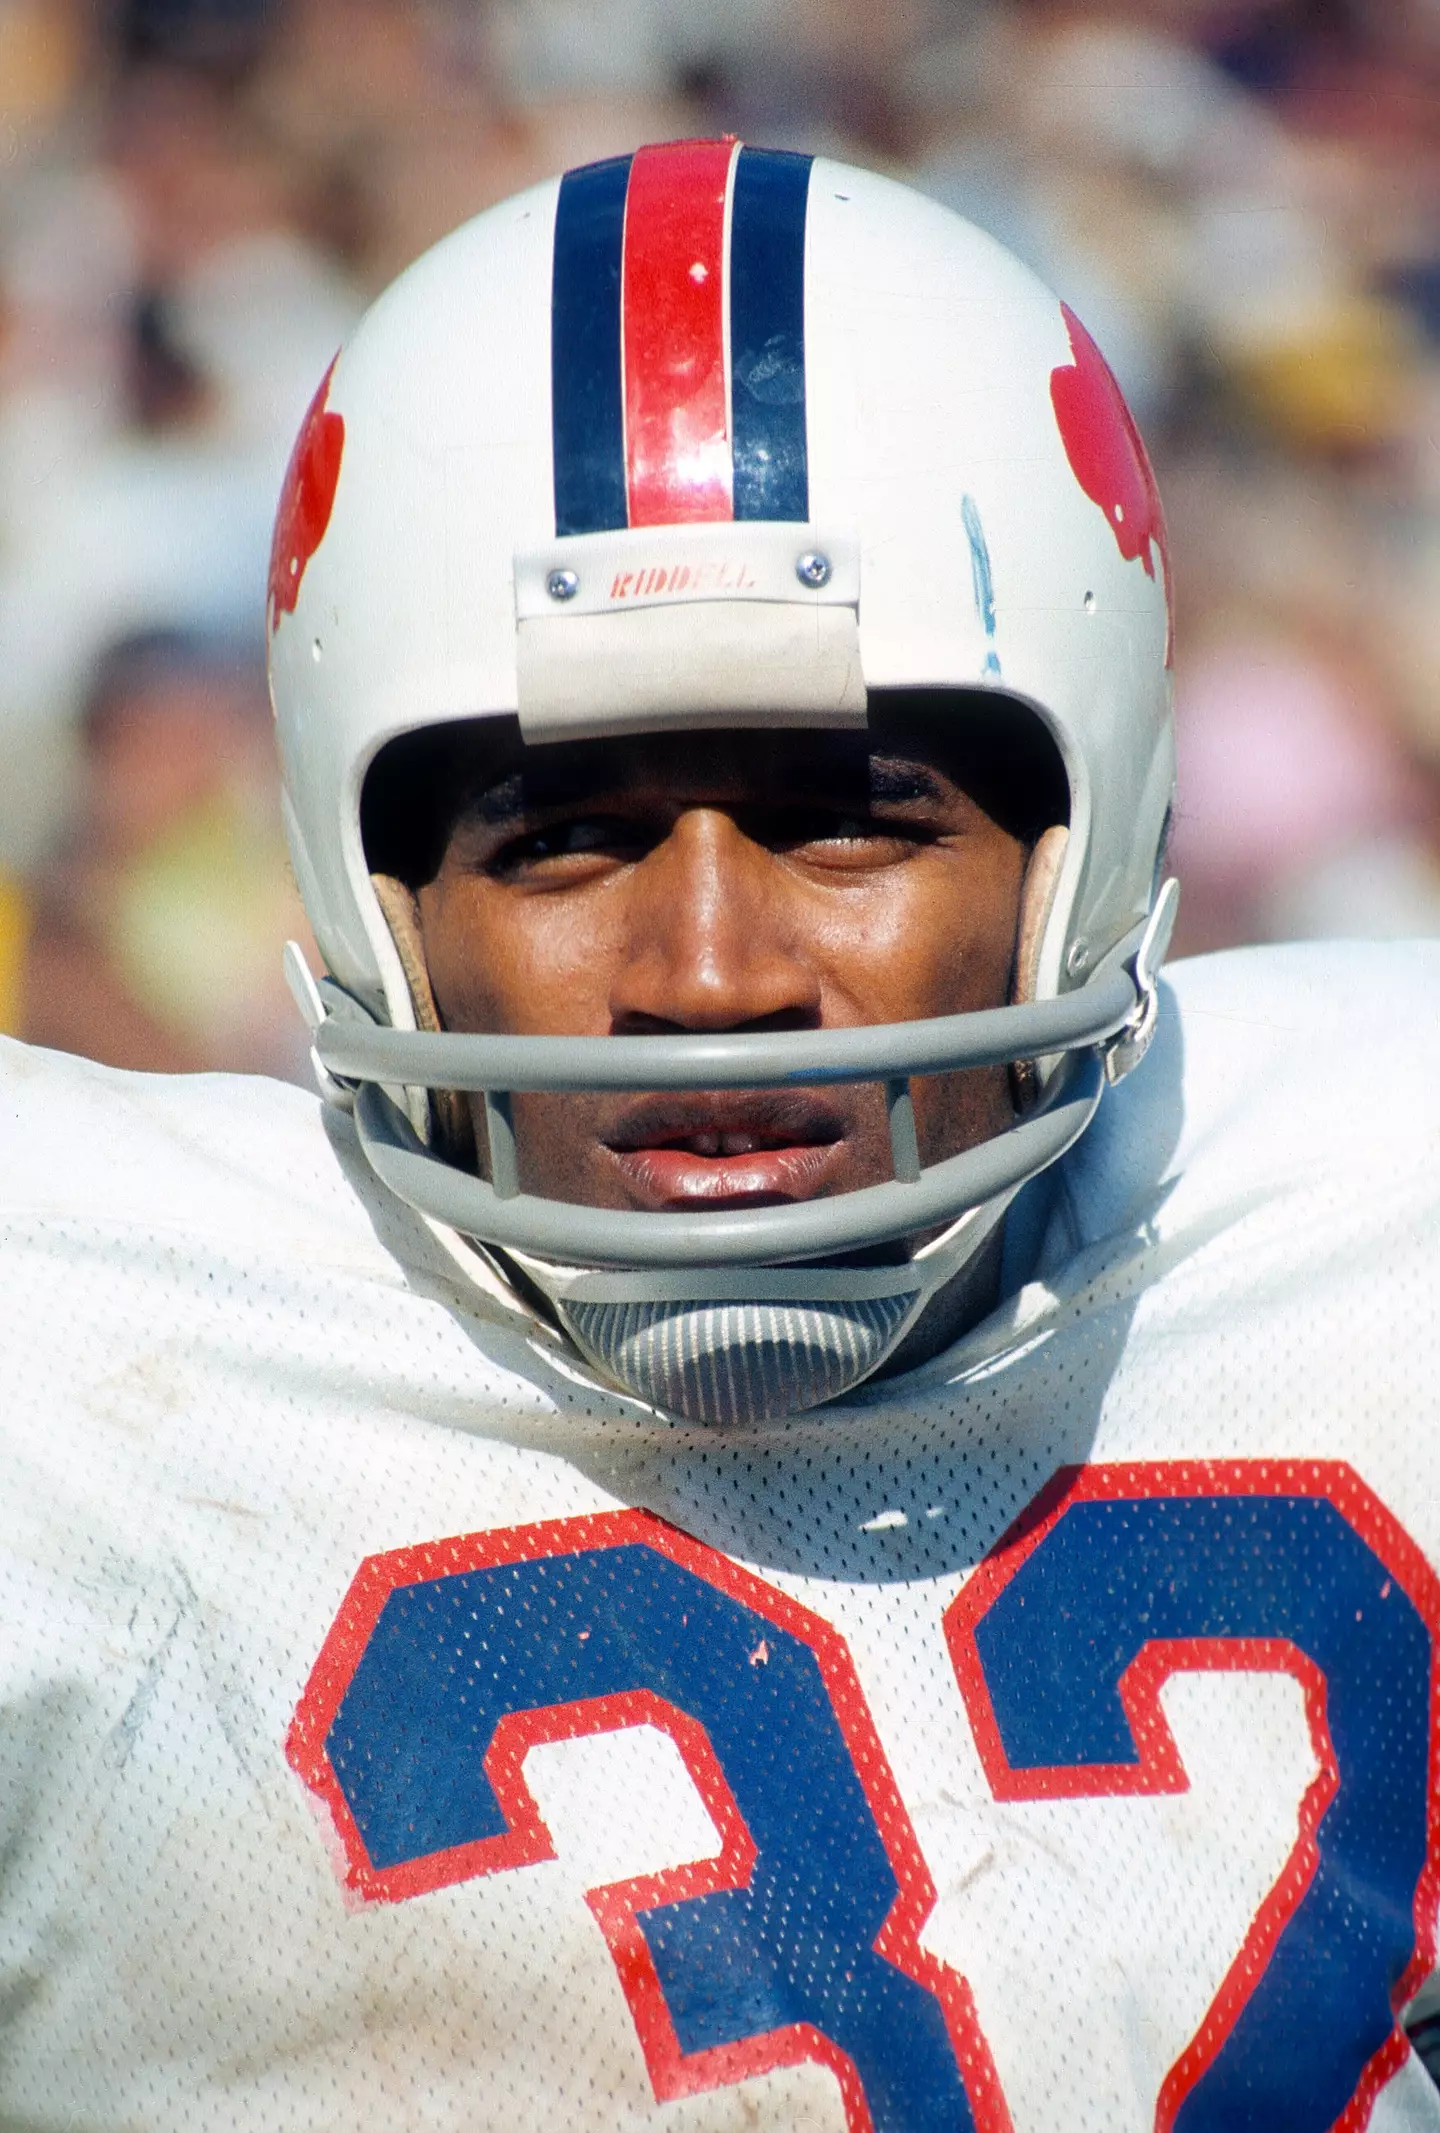 He was inducted into the Pro Football Hall of Fame in 1985. (Focus on Sport/Getty Images)